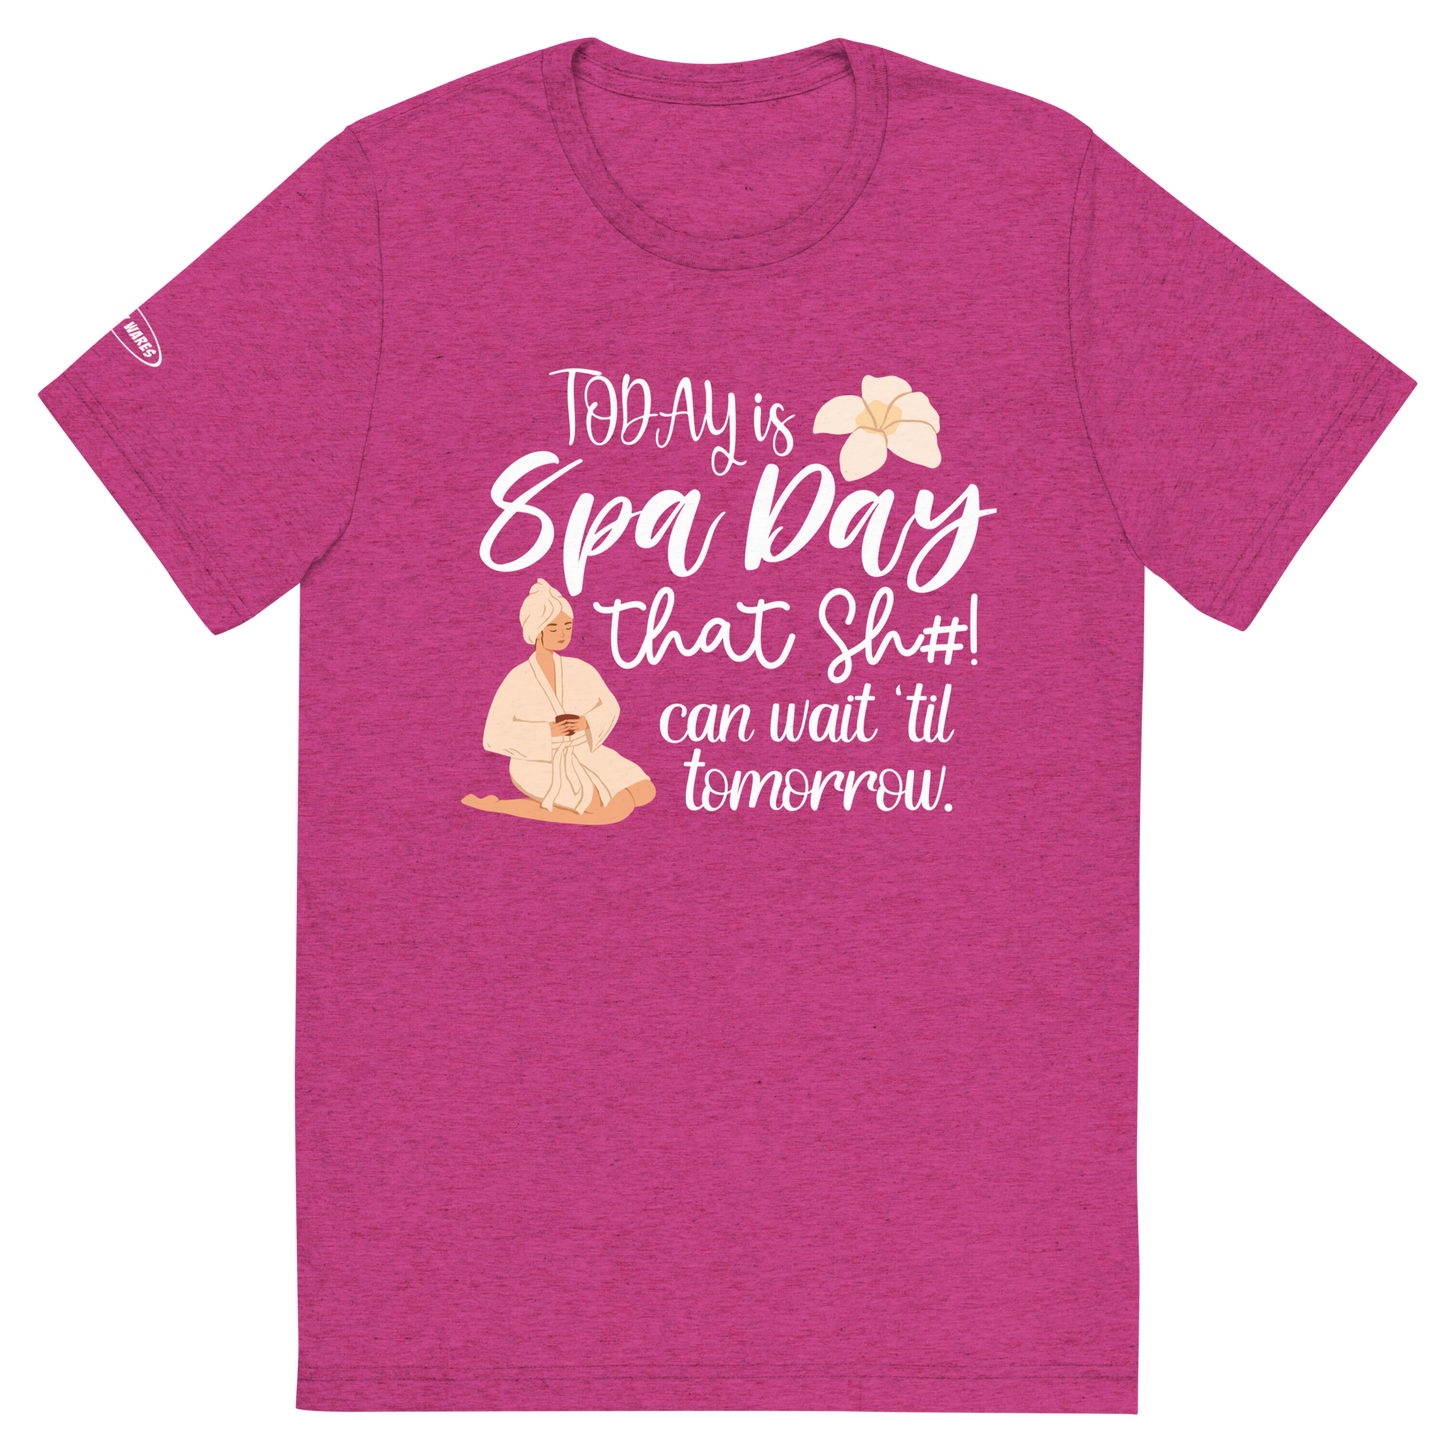 CLASSY - Today is Spa Day. That Sh#t can Wait 'til Tomorrow - Funny T-Shirt